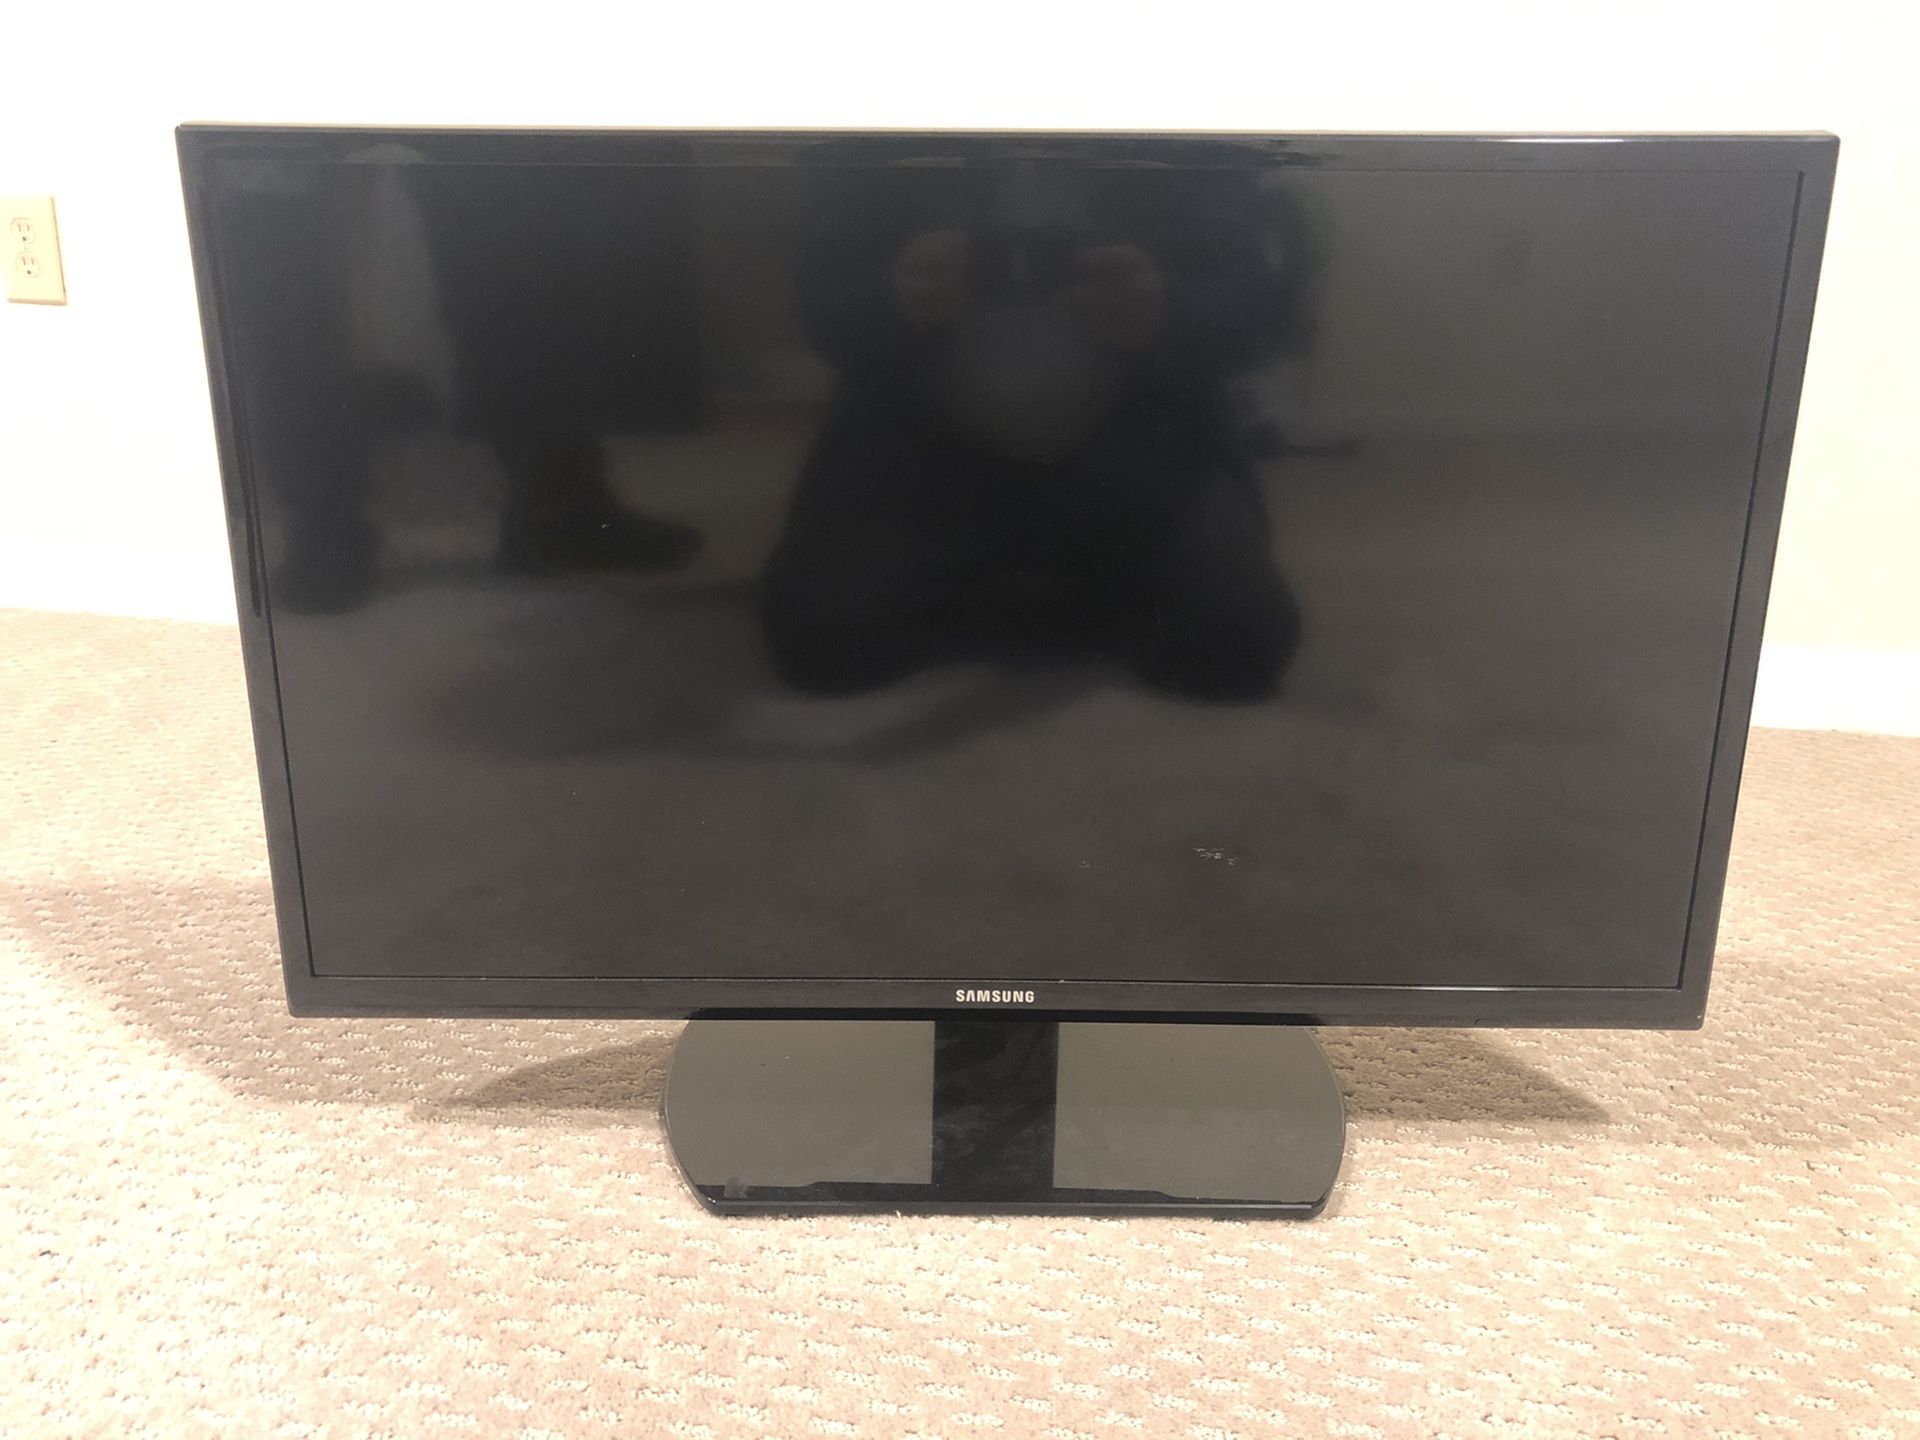 Samsung 32 inc TV 720p with stand